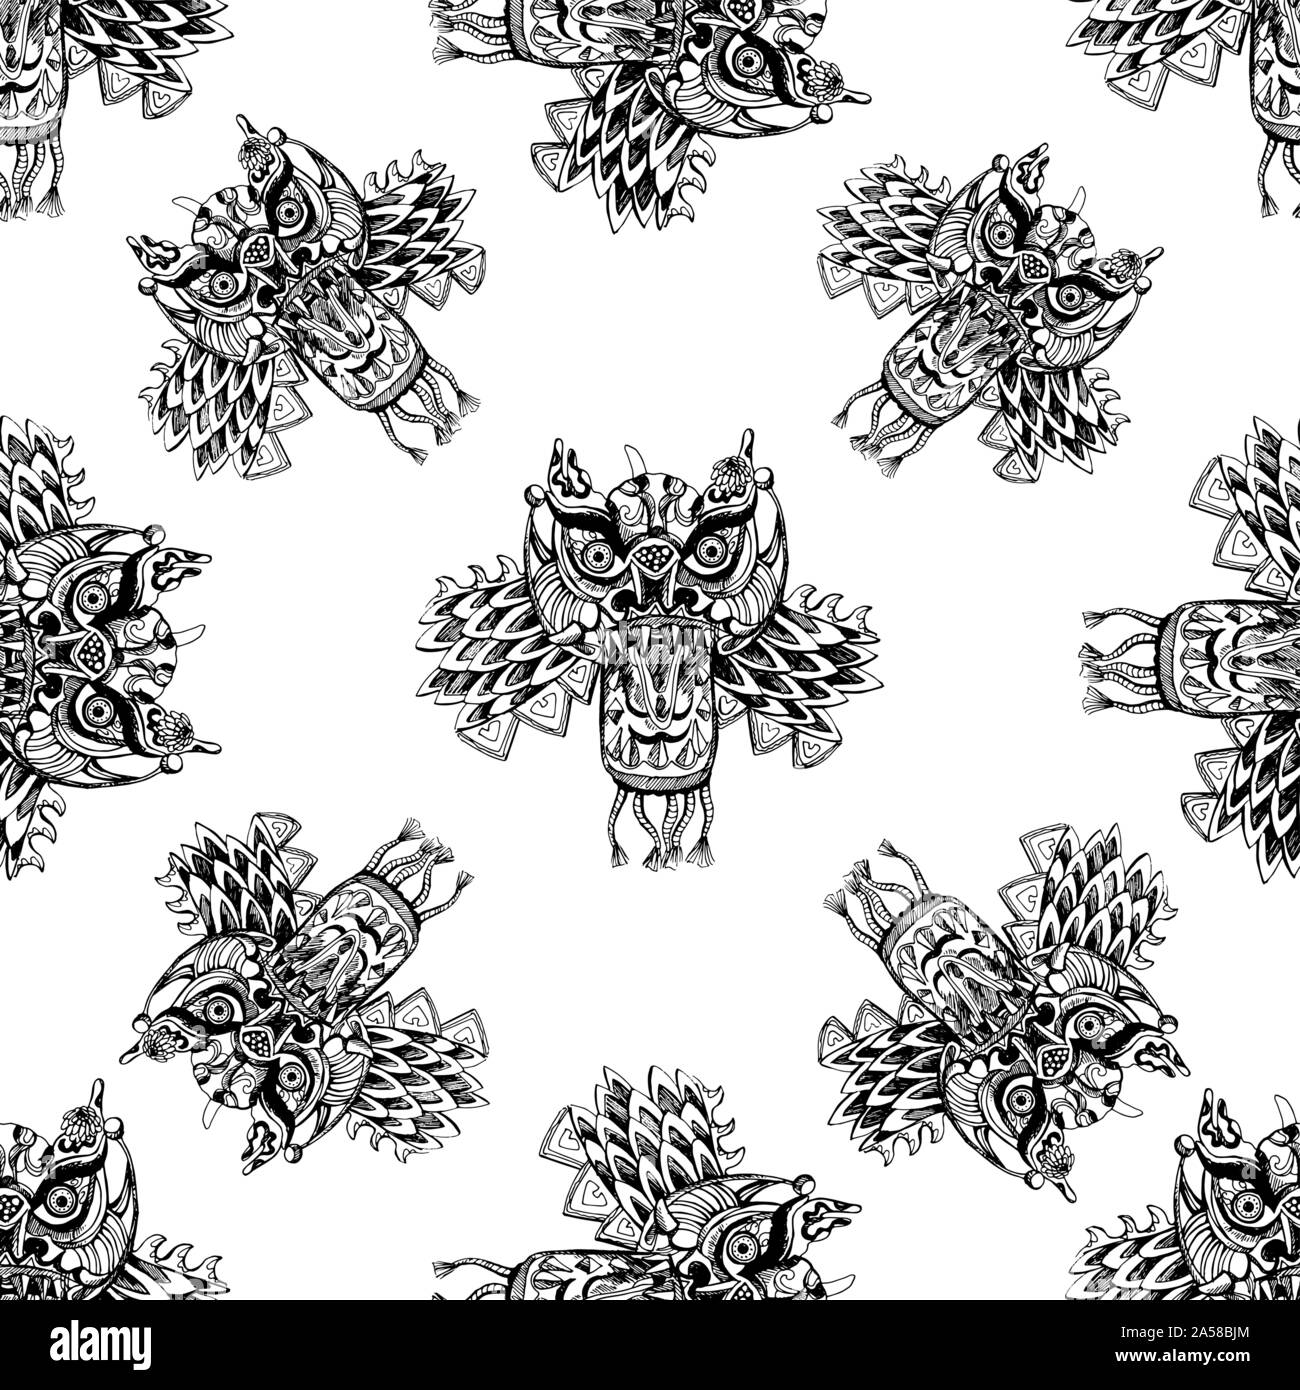 Seamless pattern of hand drawn sketch style Chinese dragon masks isolated on white background. Vector illustration. Stock Vector